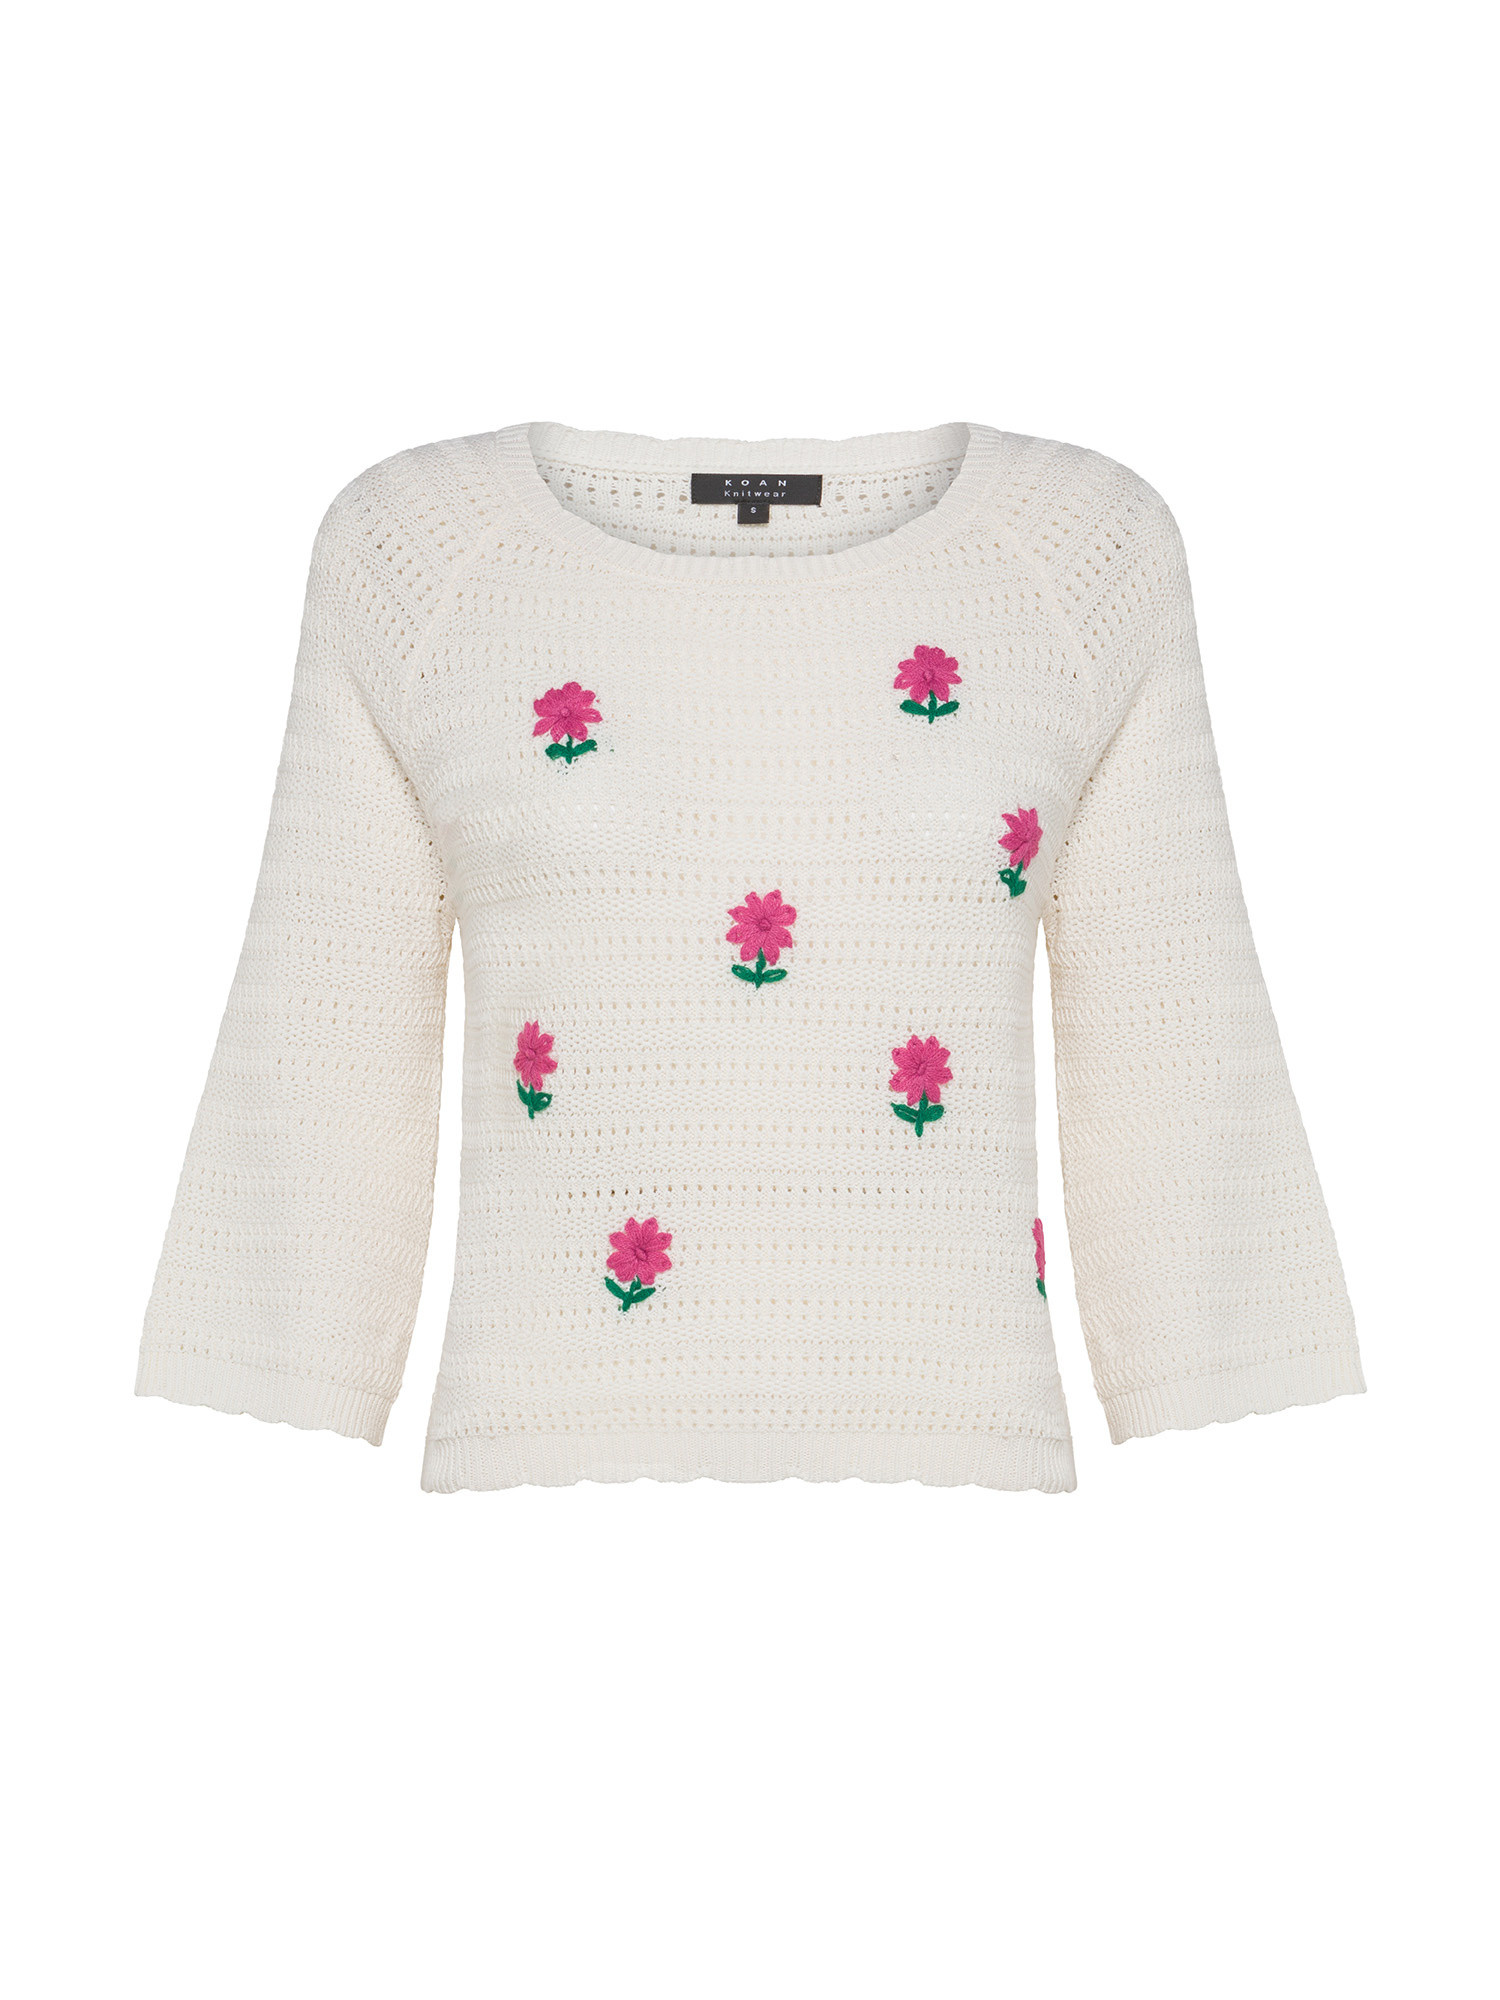 Koan - Fancy stitch pullover in cotton with embroidery, White, large image number 0